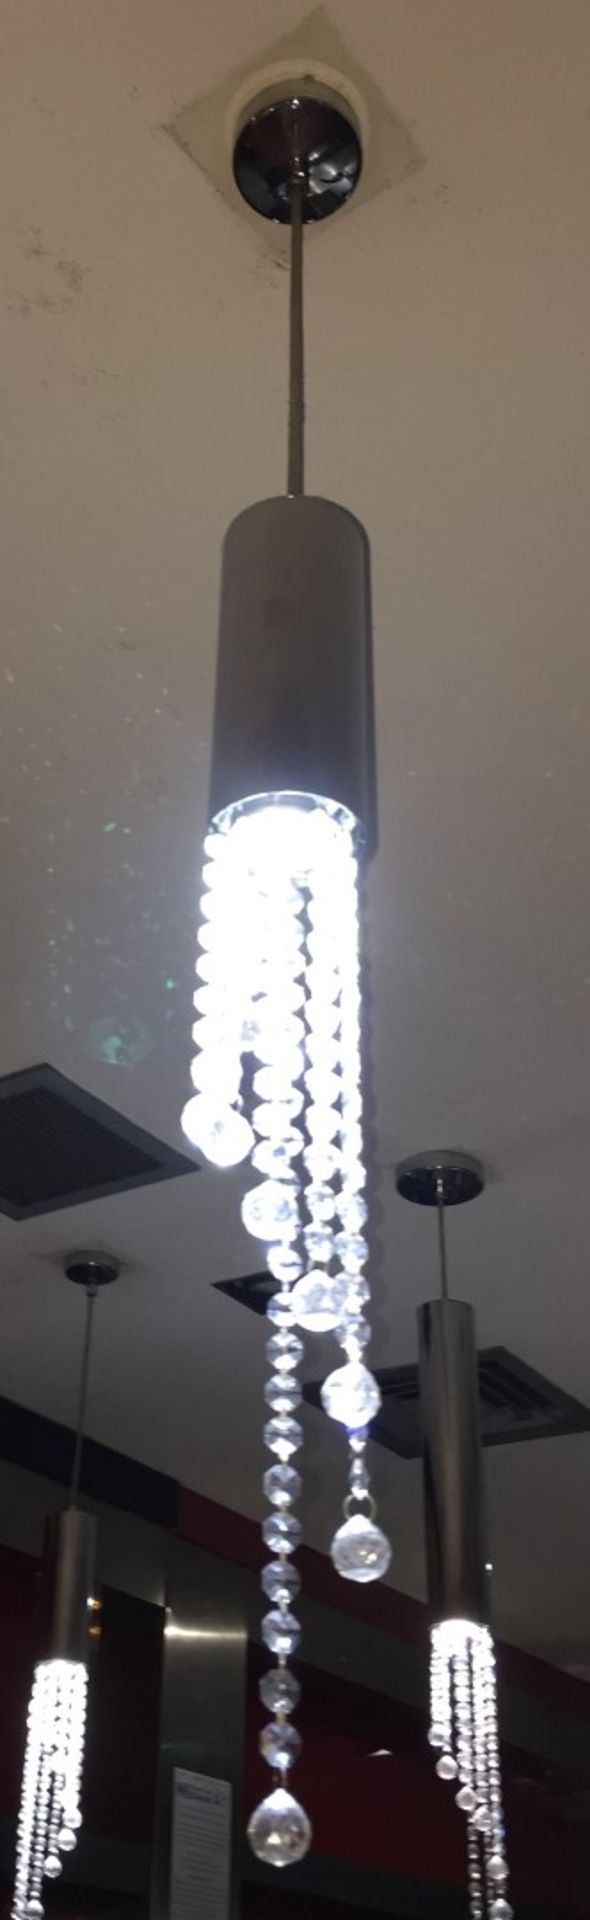 3 x Contemporary Pendant Ceiling Lights With Faux Crystal Droplets - CL188 - Ref GF2 - Drop - Image 2 of 6